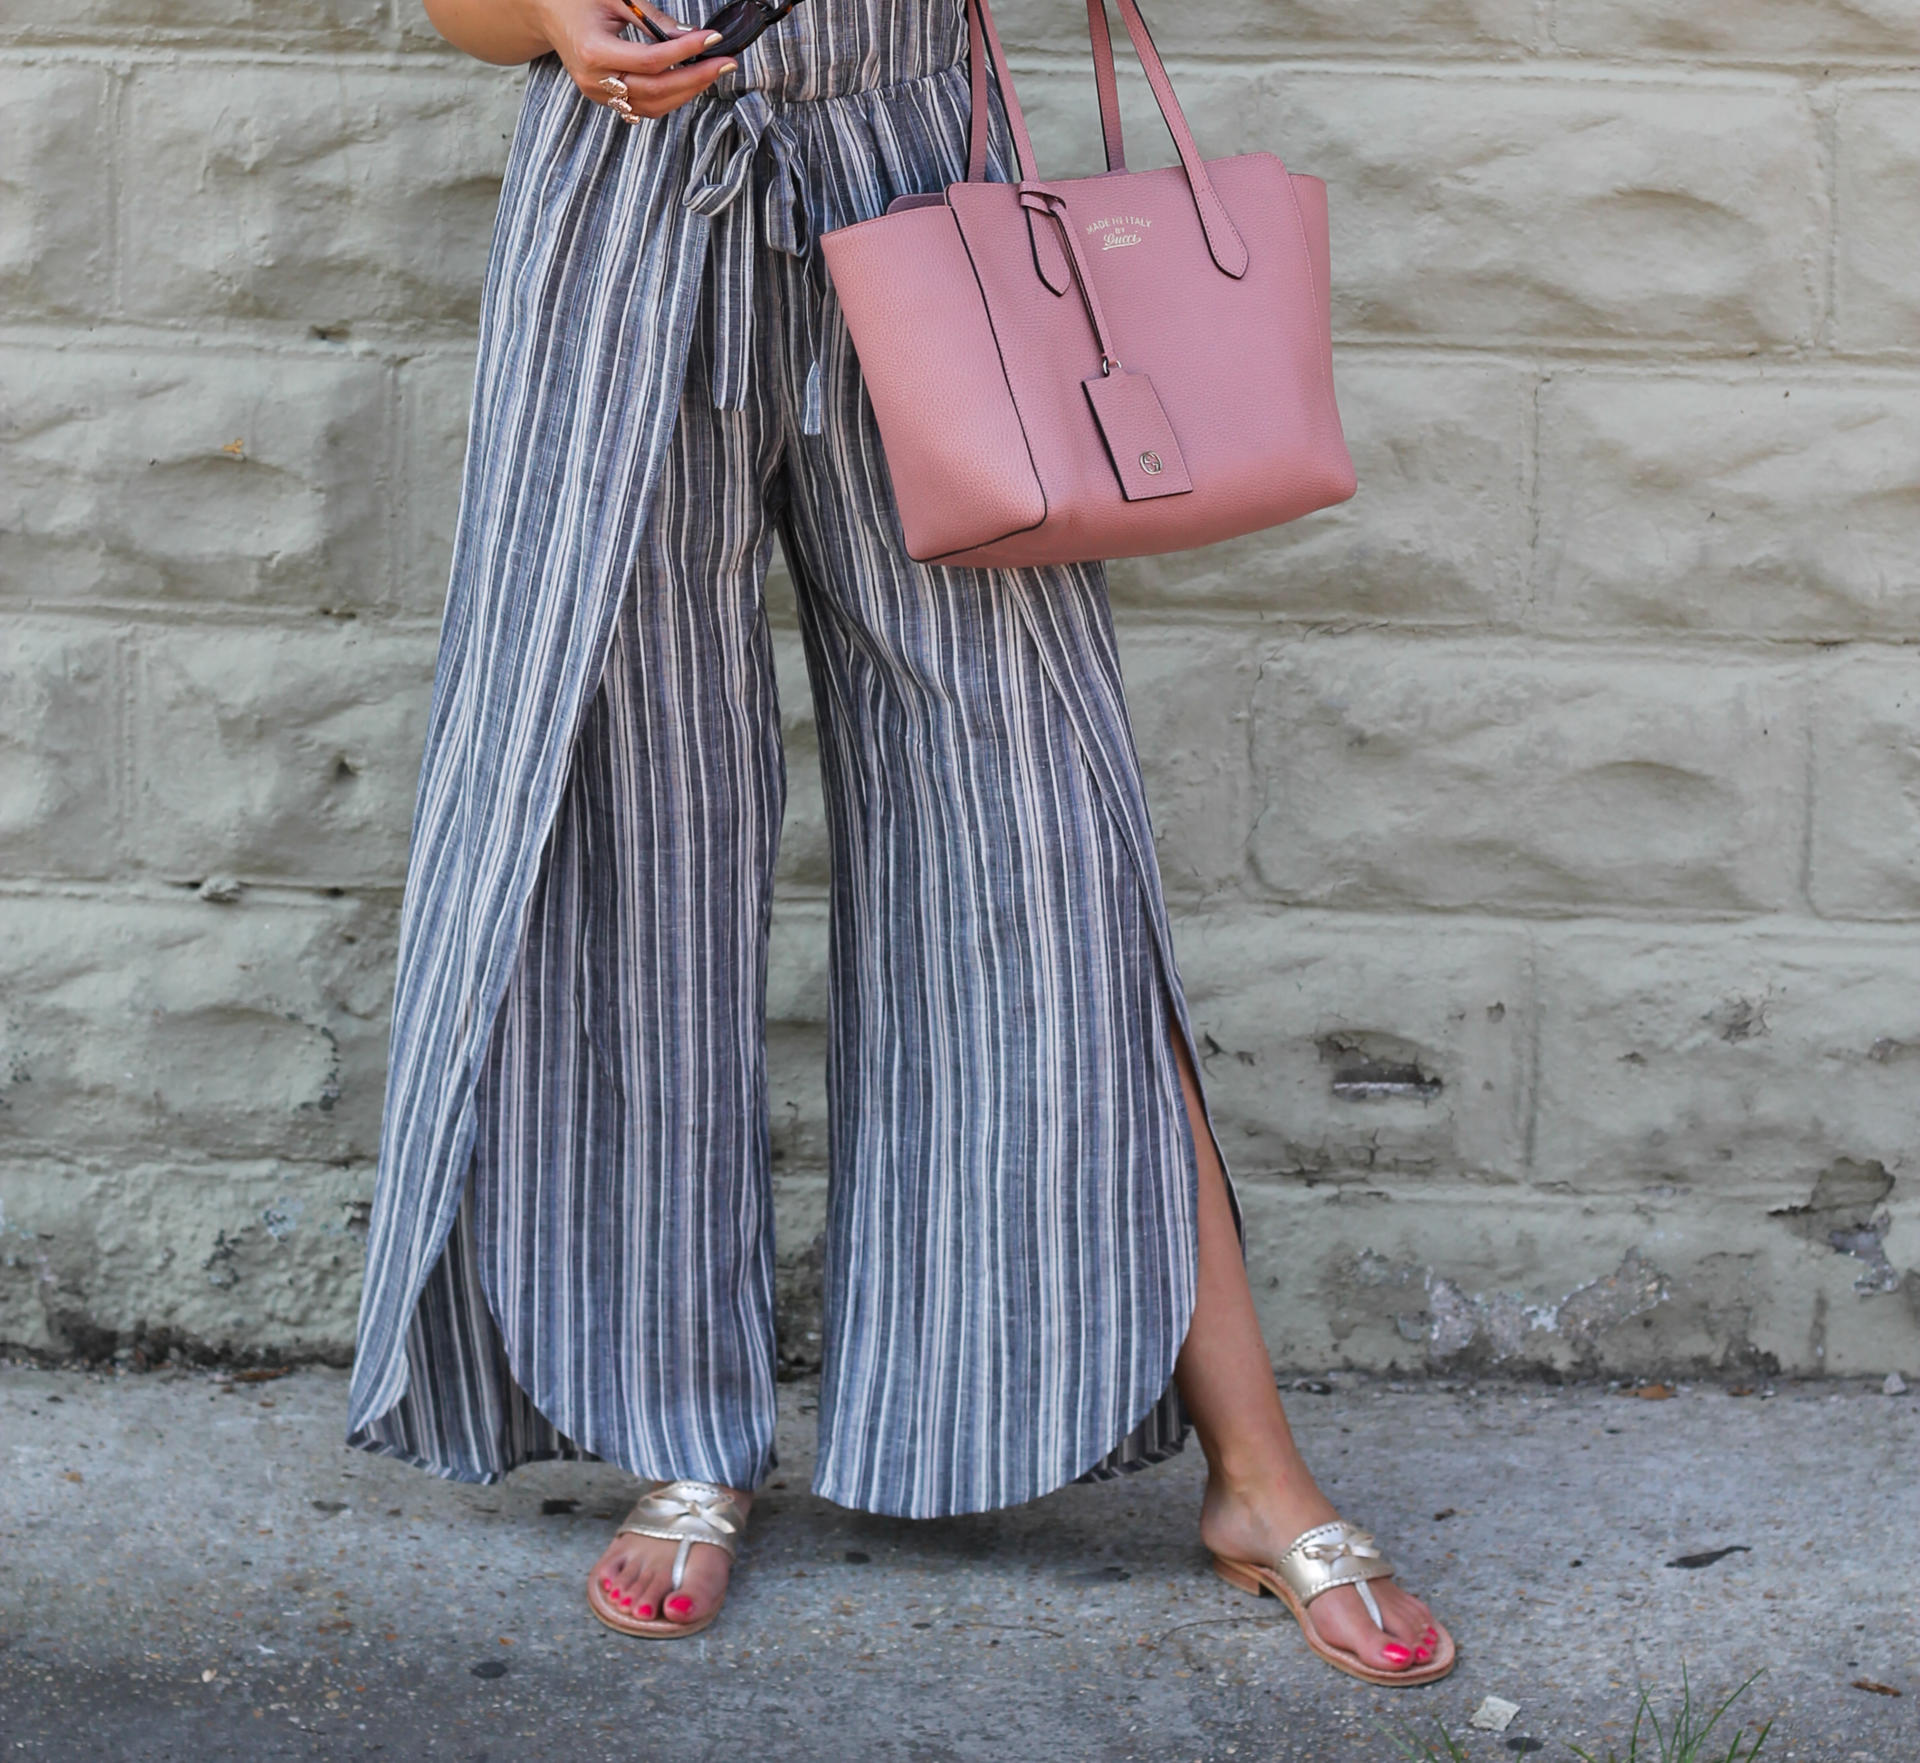 A Striped Jumpsuit & $1000 Nordstrom Gift Card Giveaway - A Striped Jumpsuit by New York fashion blogger Style Waltz